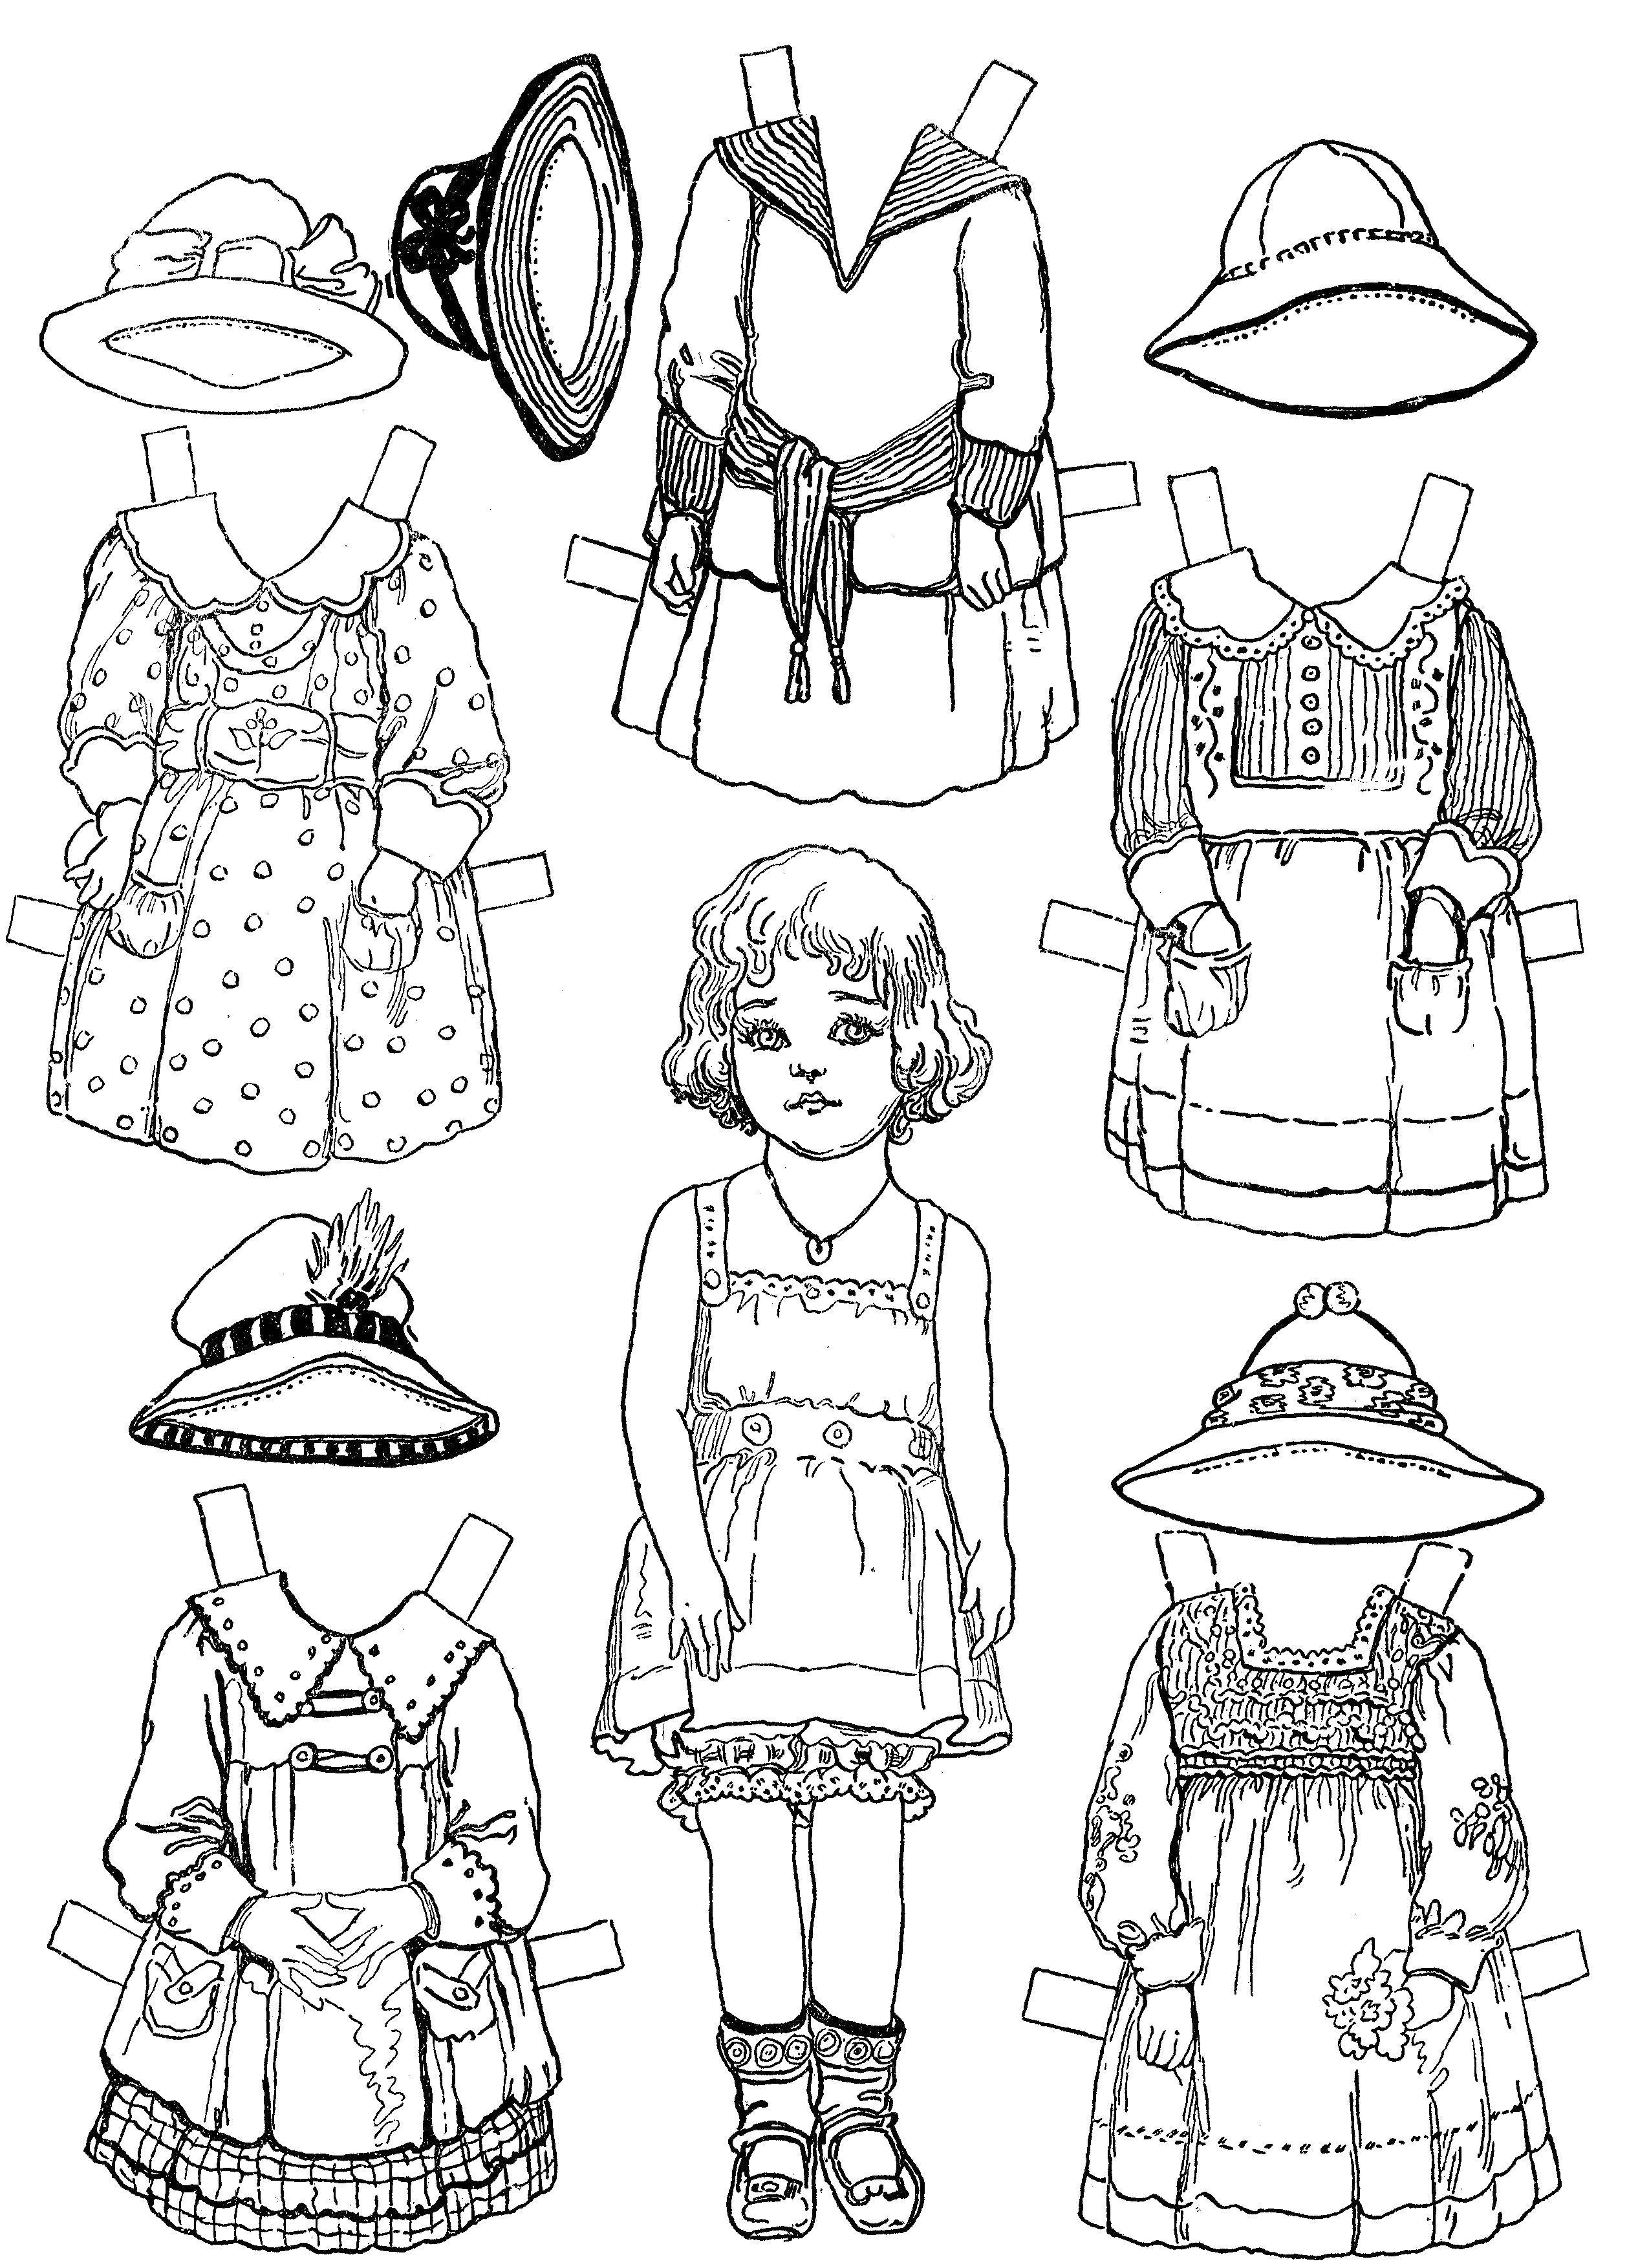 Coloring Clothes for dolls. Category Dolls. Tags:  dolls, clothes, girls.